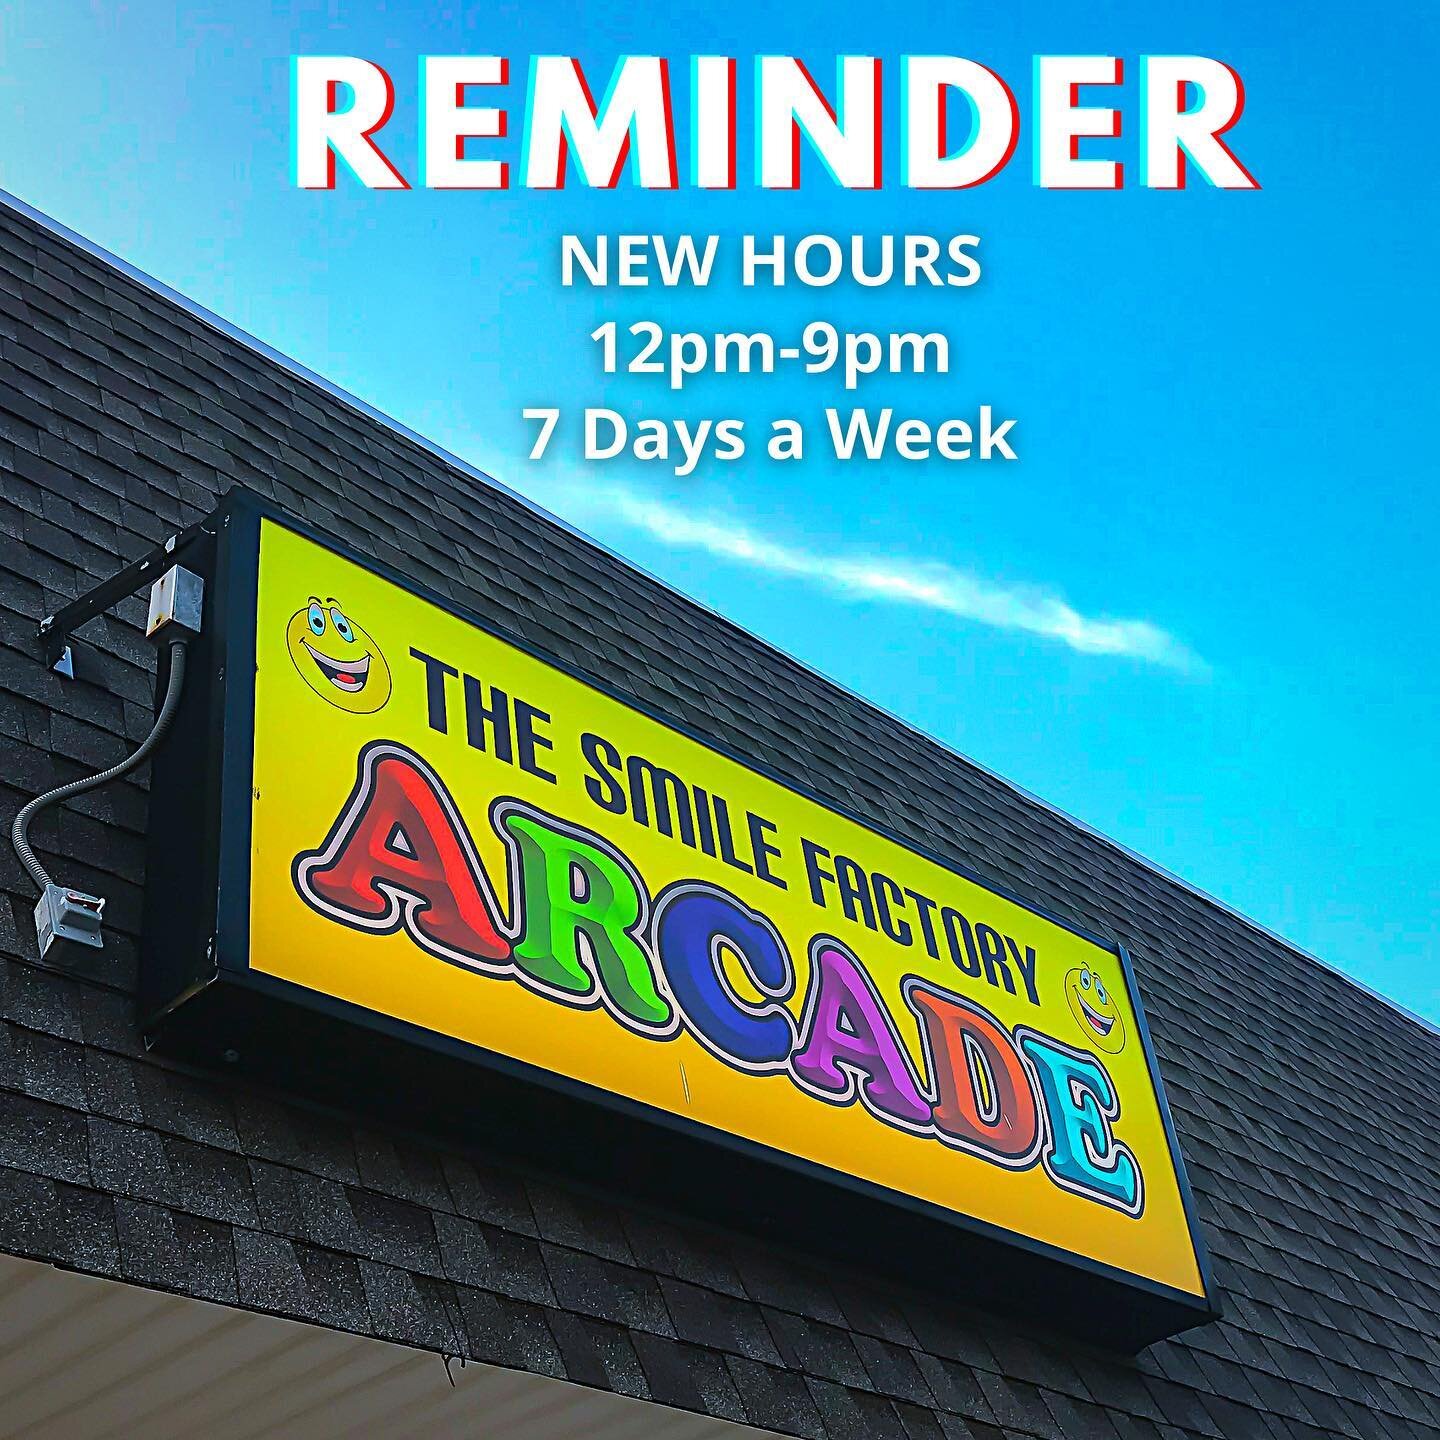 Just a reminder, tomorrow starts our new hours! Stop by and see us!